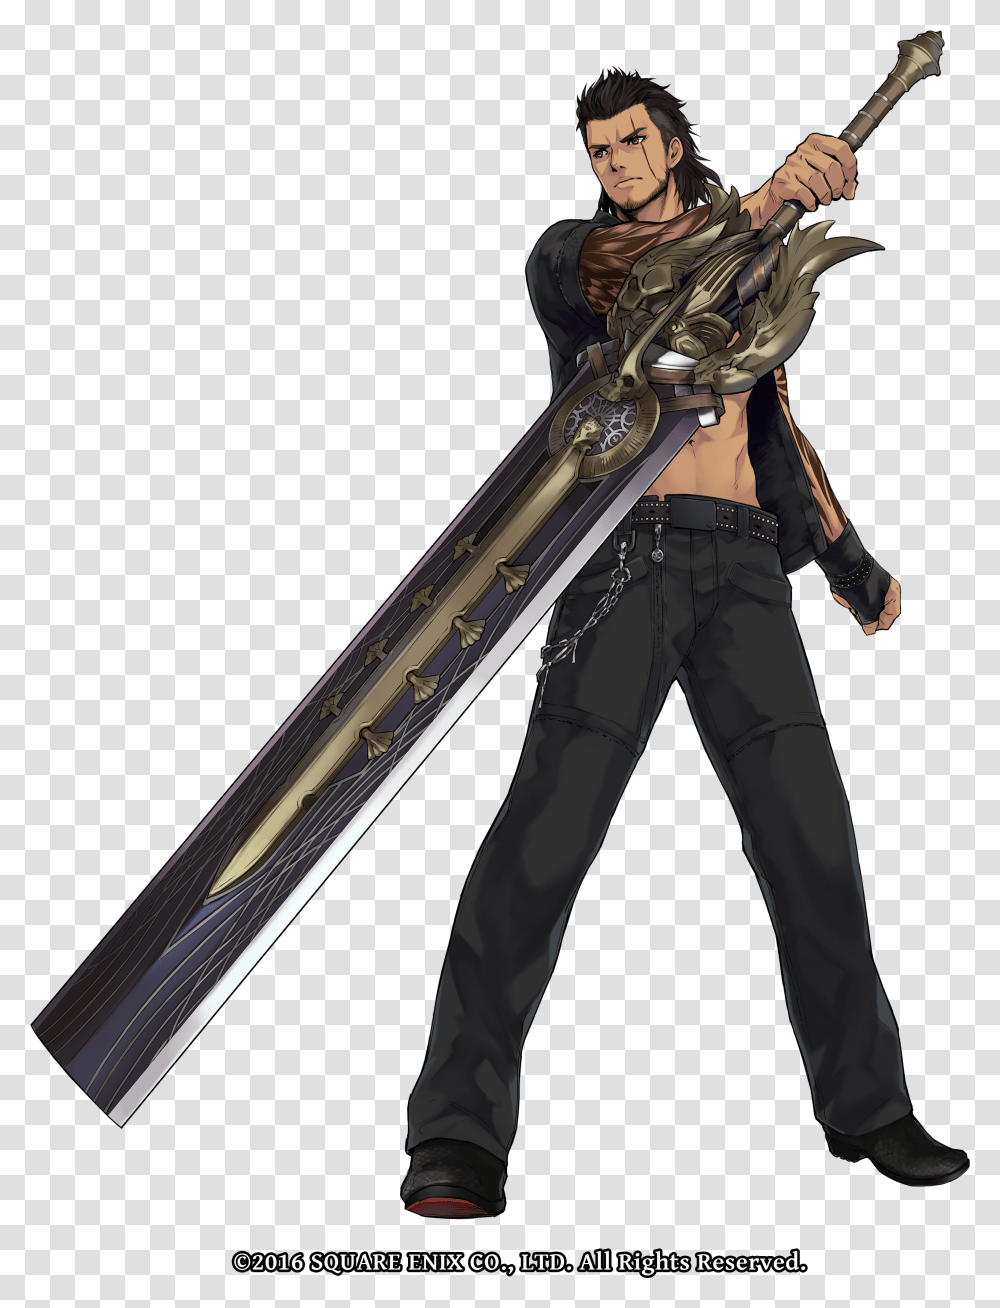 In Defense Prince Noctis And His Companions Drew Theirs Final Fantasy Xv Gladiolus Weapon, Blade, Weaponry, Sword, Person Transparent Png